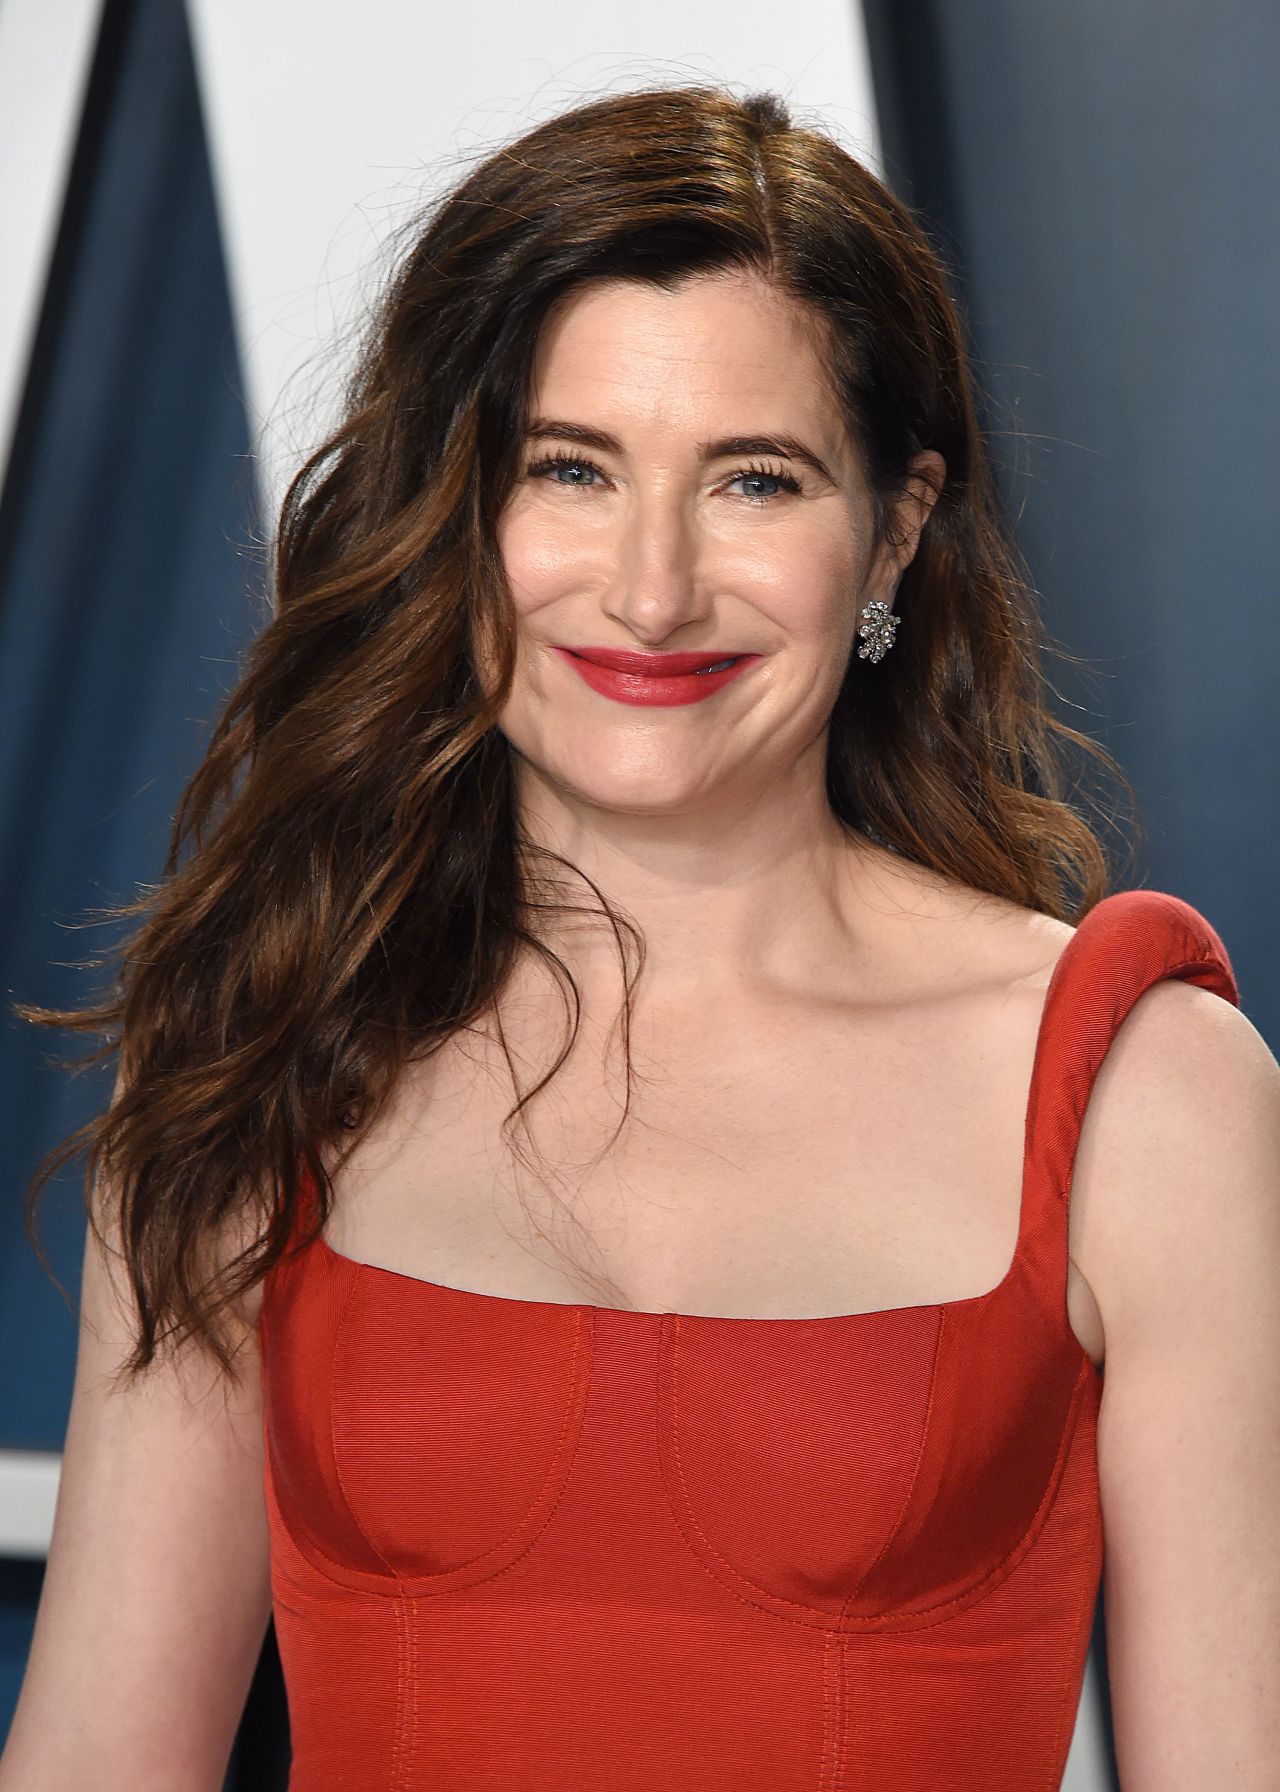 Kathryn Hahn / KATHRYN HAHN at at 2015 Emmy Awards in Los Angeles 09/20 ... / Kathryn hahn (born july 23, 1973) is an american actress, comedian, and producer.